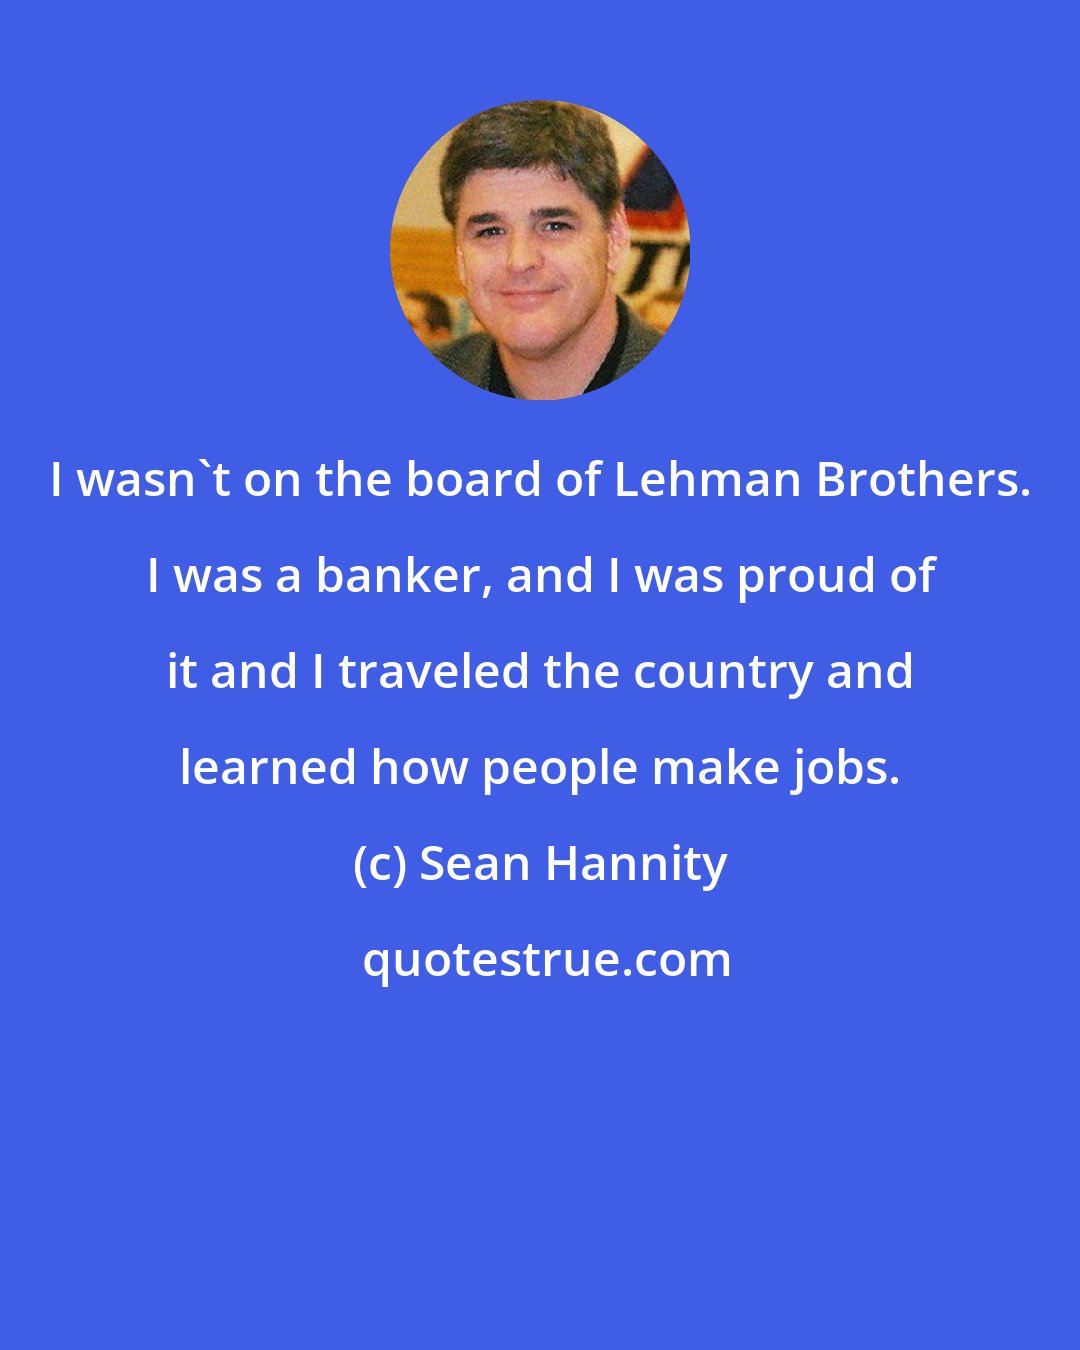 Sean Hannity: I wasn't on the board of Lehman Brothers. I was a banker, and I was proud of it and I traveled the country and learned how people make jobs.